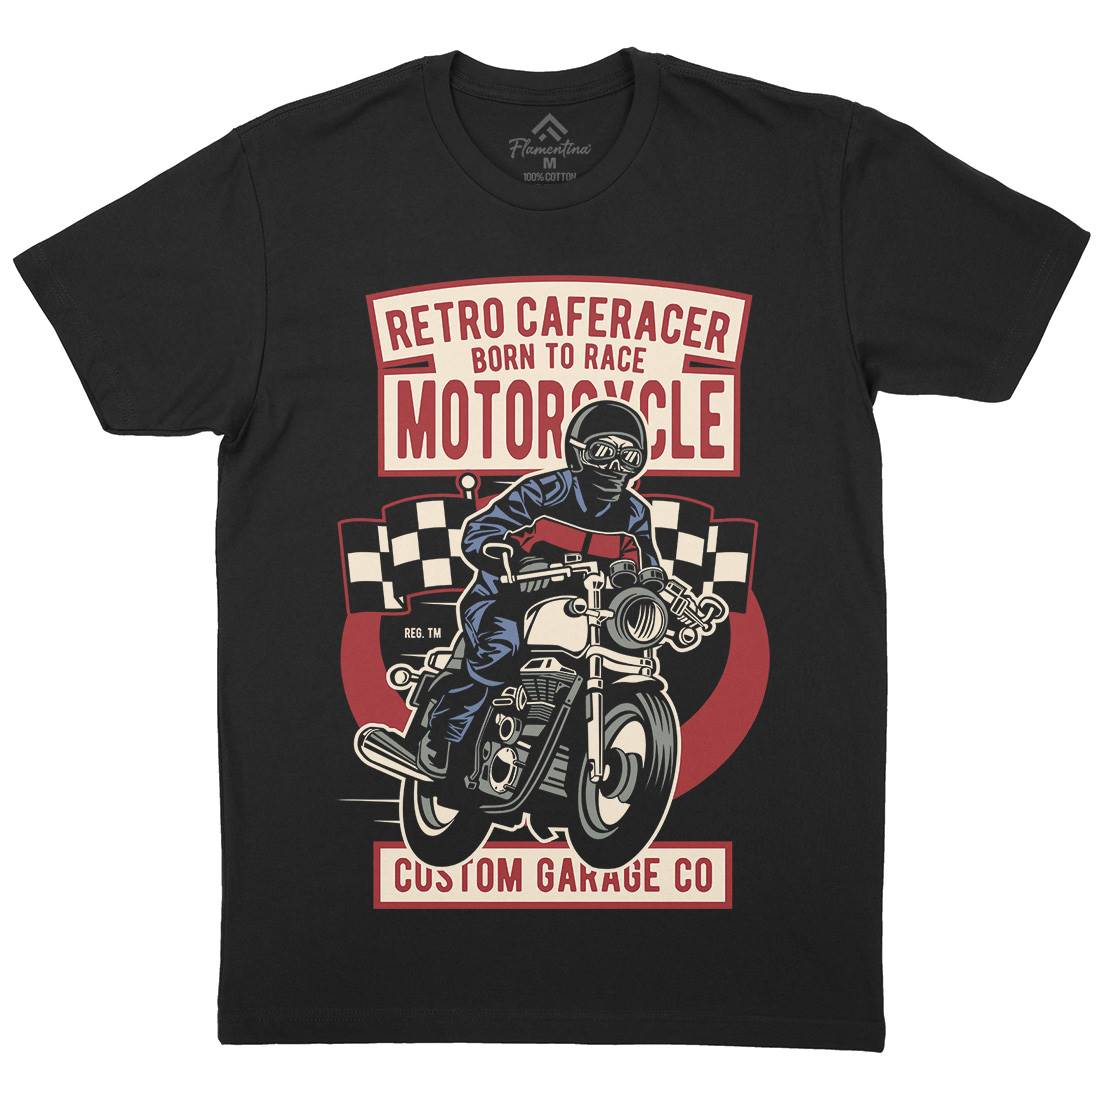 Retro Caferacer Mens Crew Neck T-Shirt Motorcycles D563